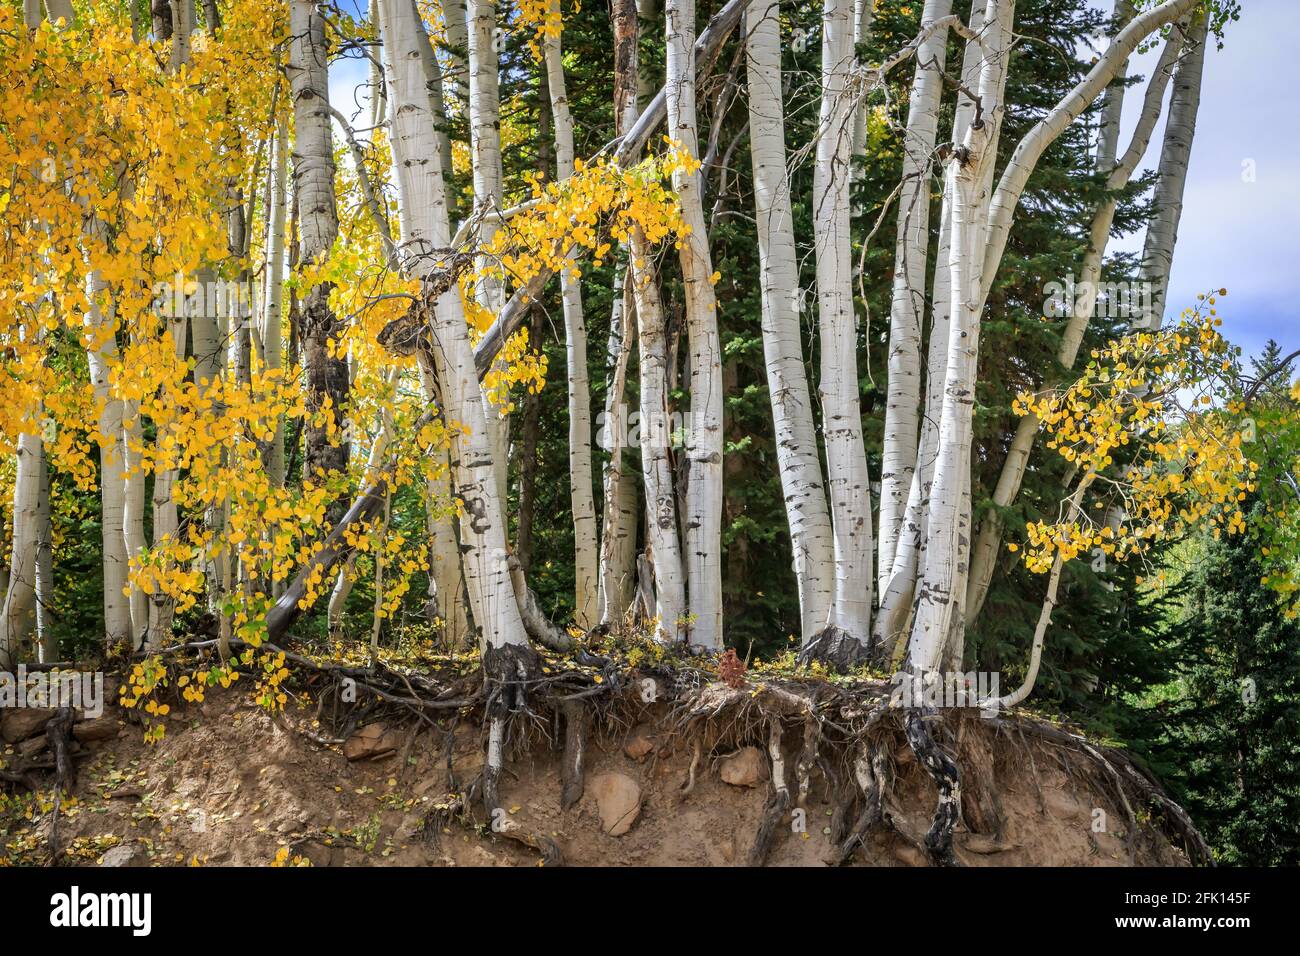 Aspen forest and Autumn scenery in Kebler Pass, Gunnison County, Colorado, USA Stock Photo